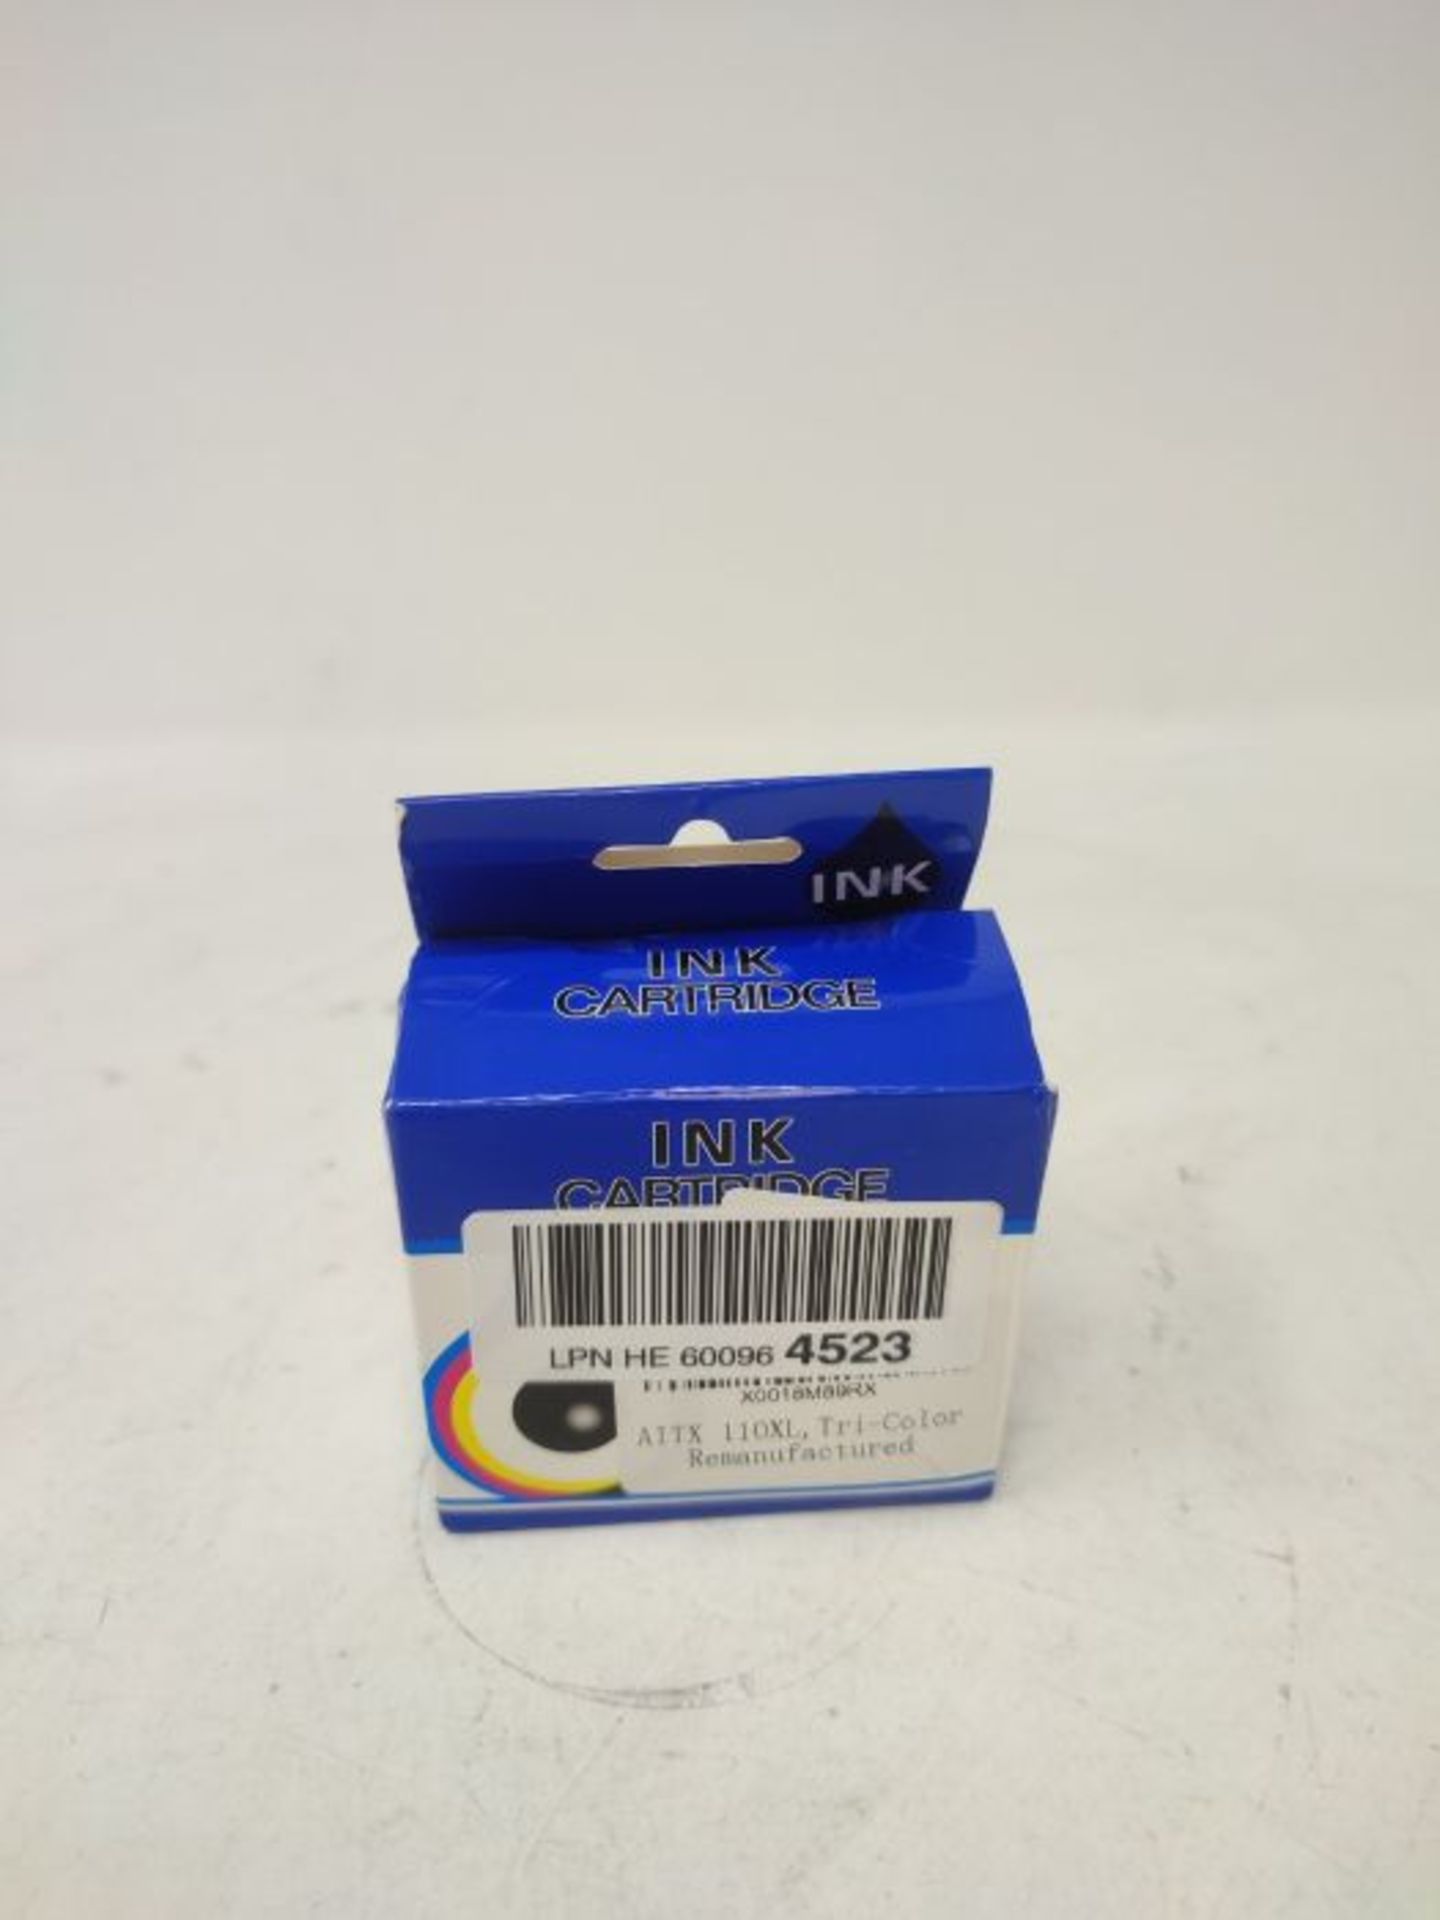 AITX Remanufactured Ink Cartridge for HP 110 CB304A Tri-color Ink Cartridge use in Pho - Image 2 of 3